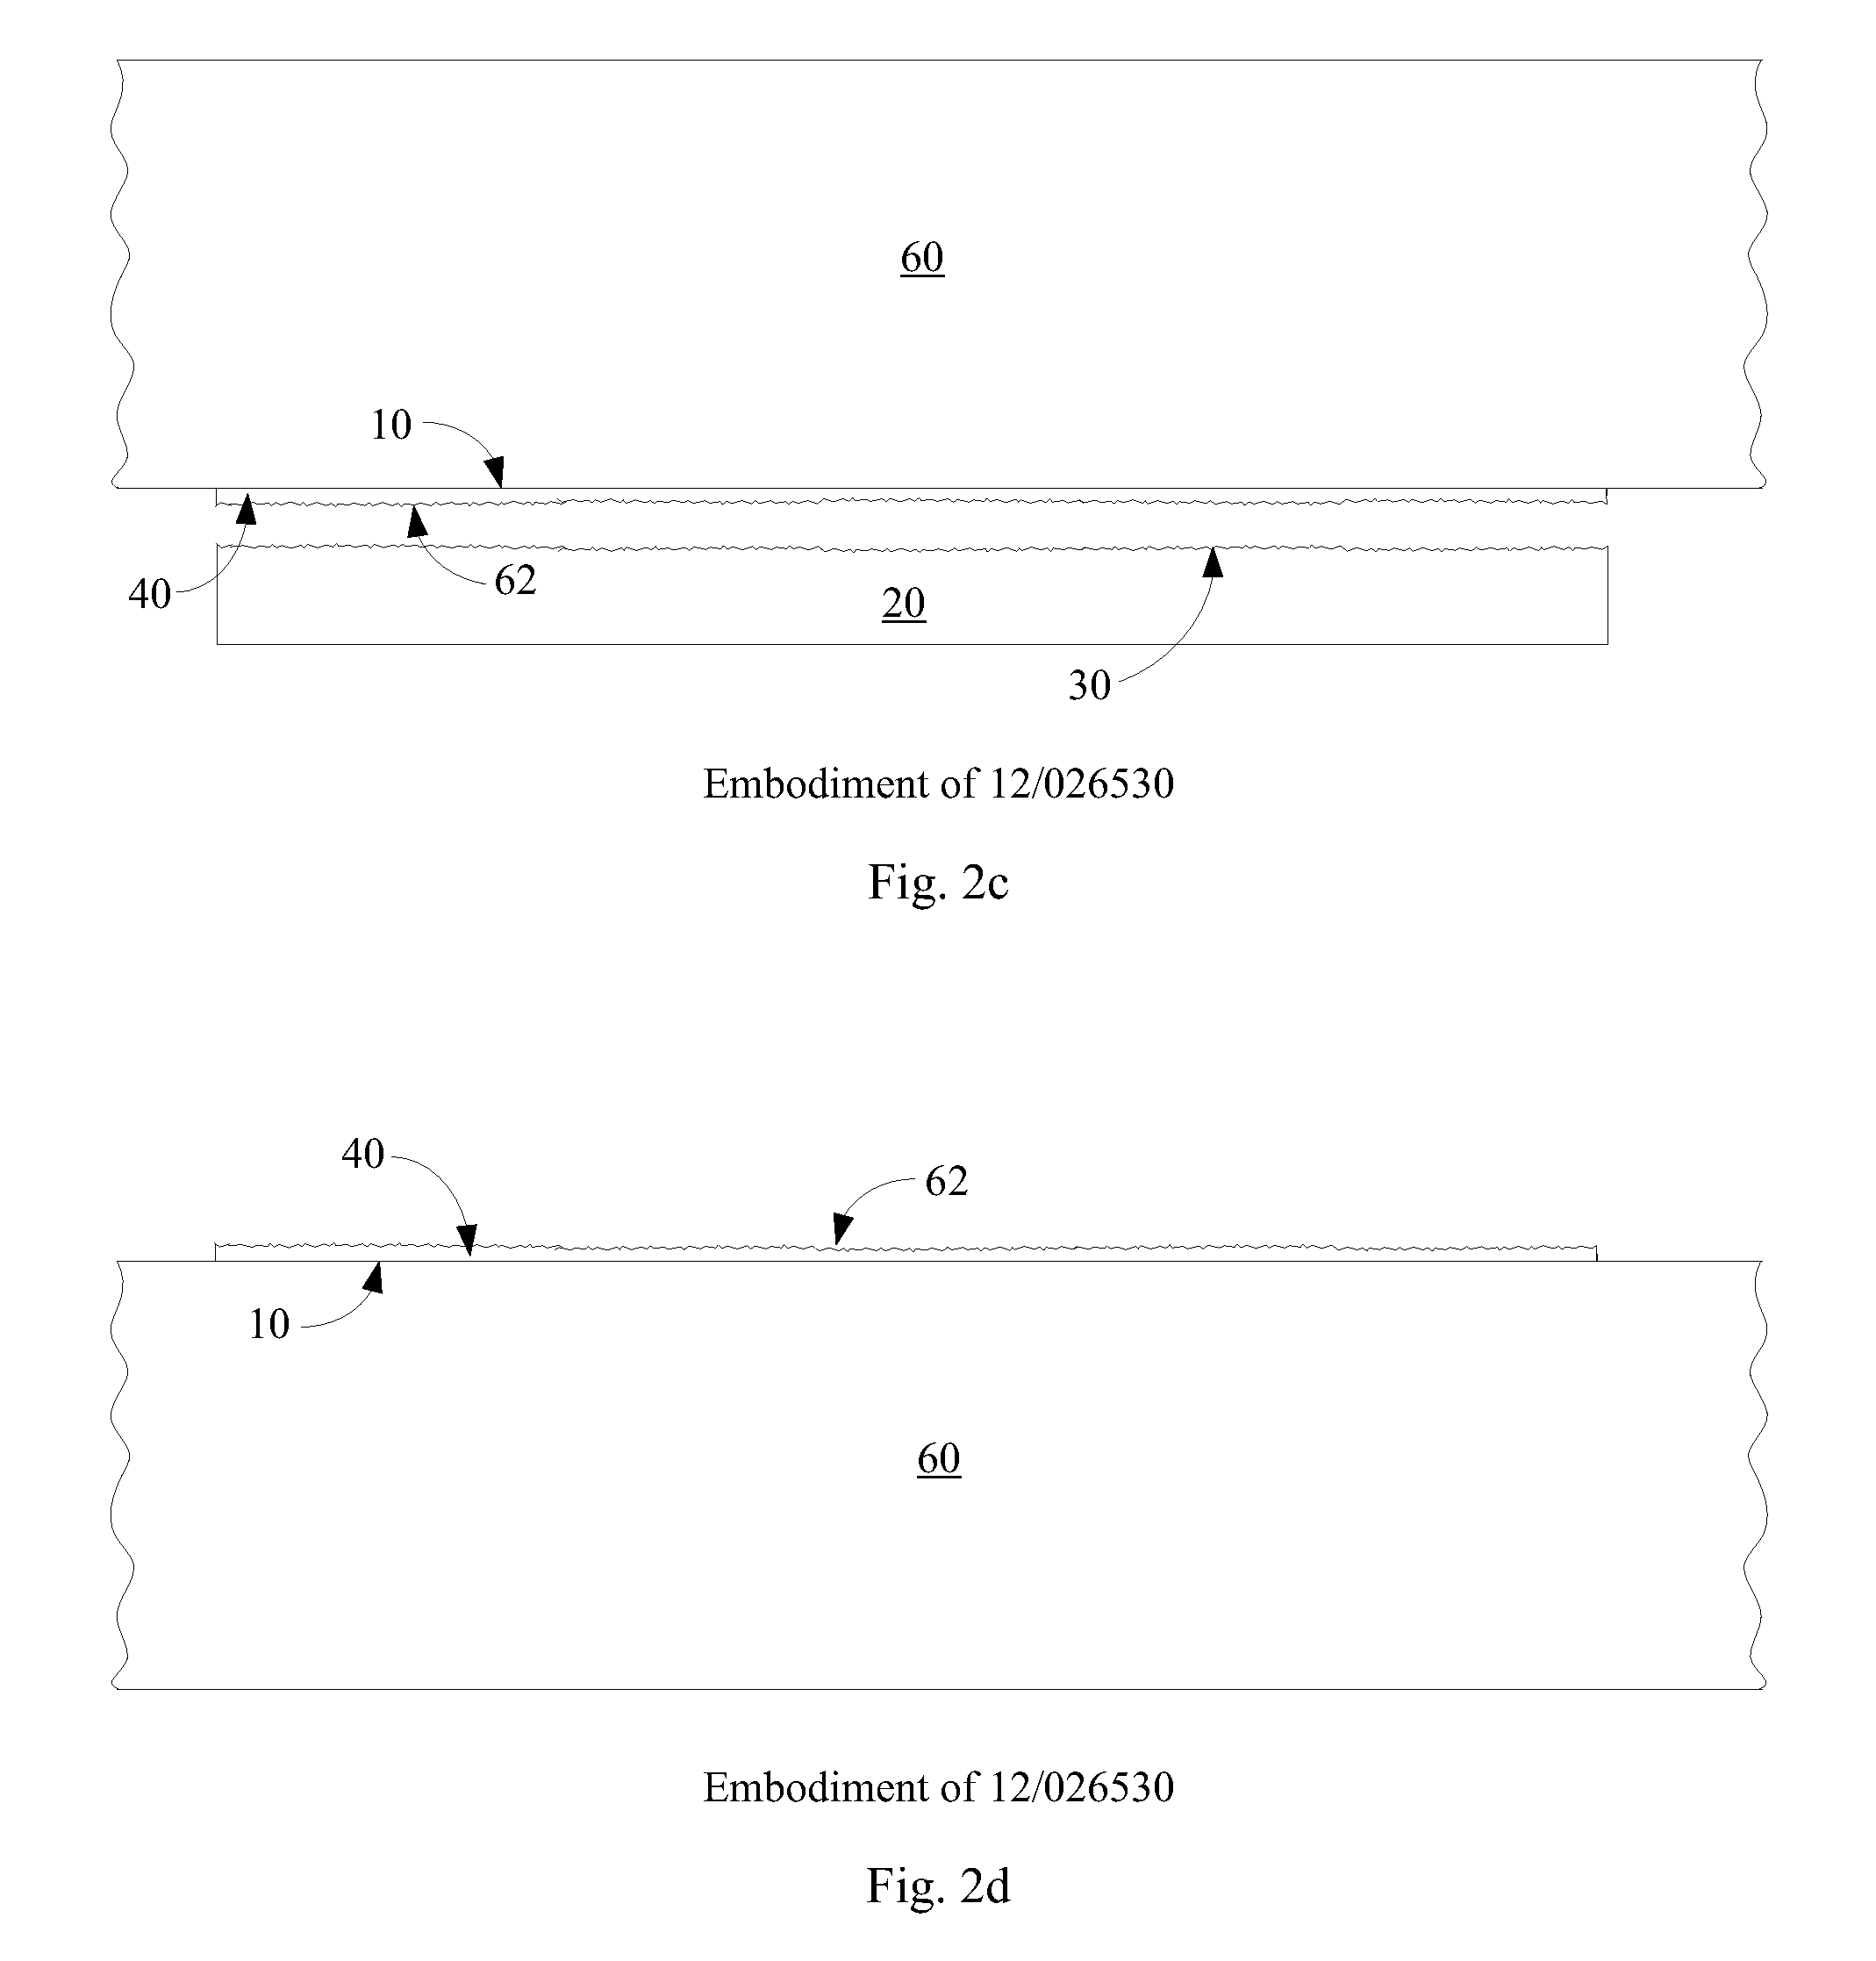 Back-contact photovoltaic cell comprising a thin lamina having a superstrate receiver element